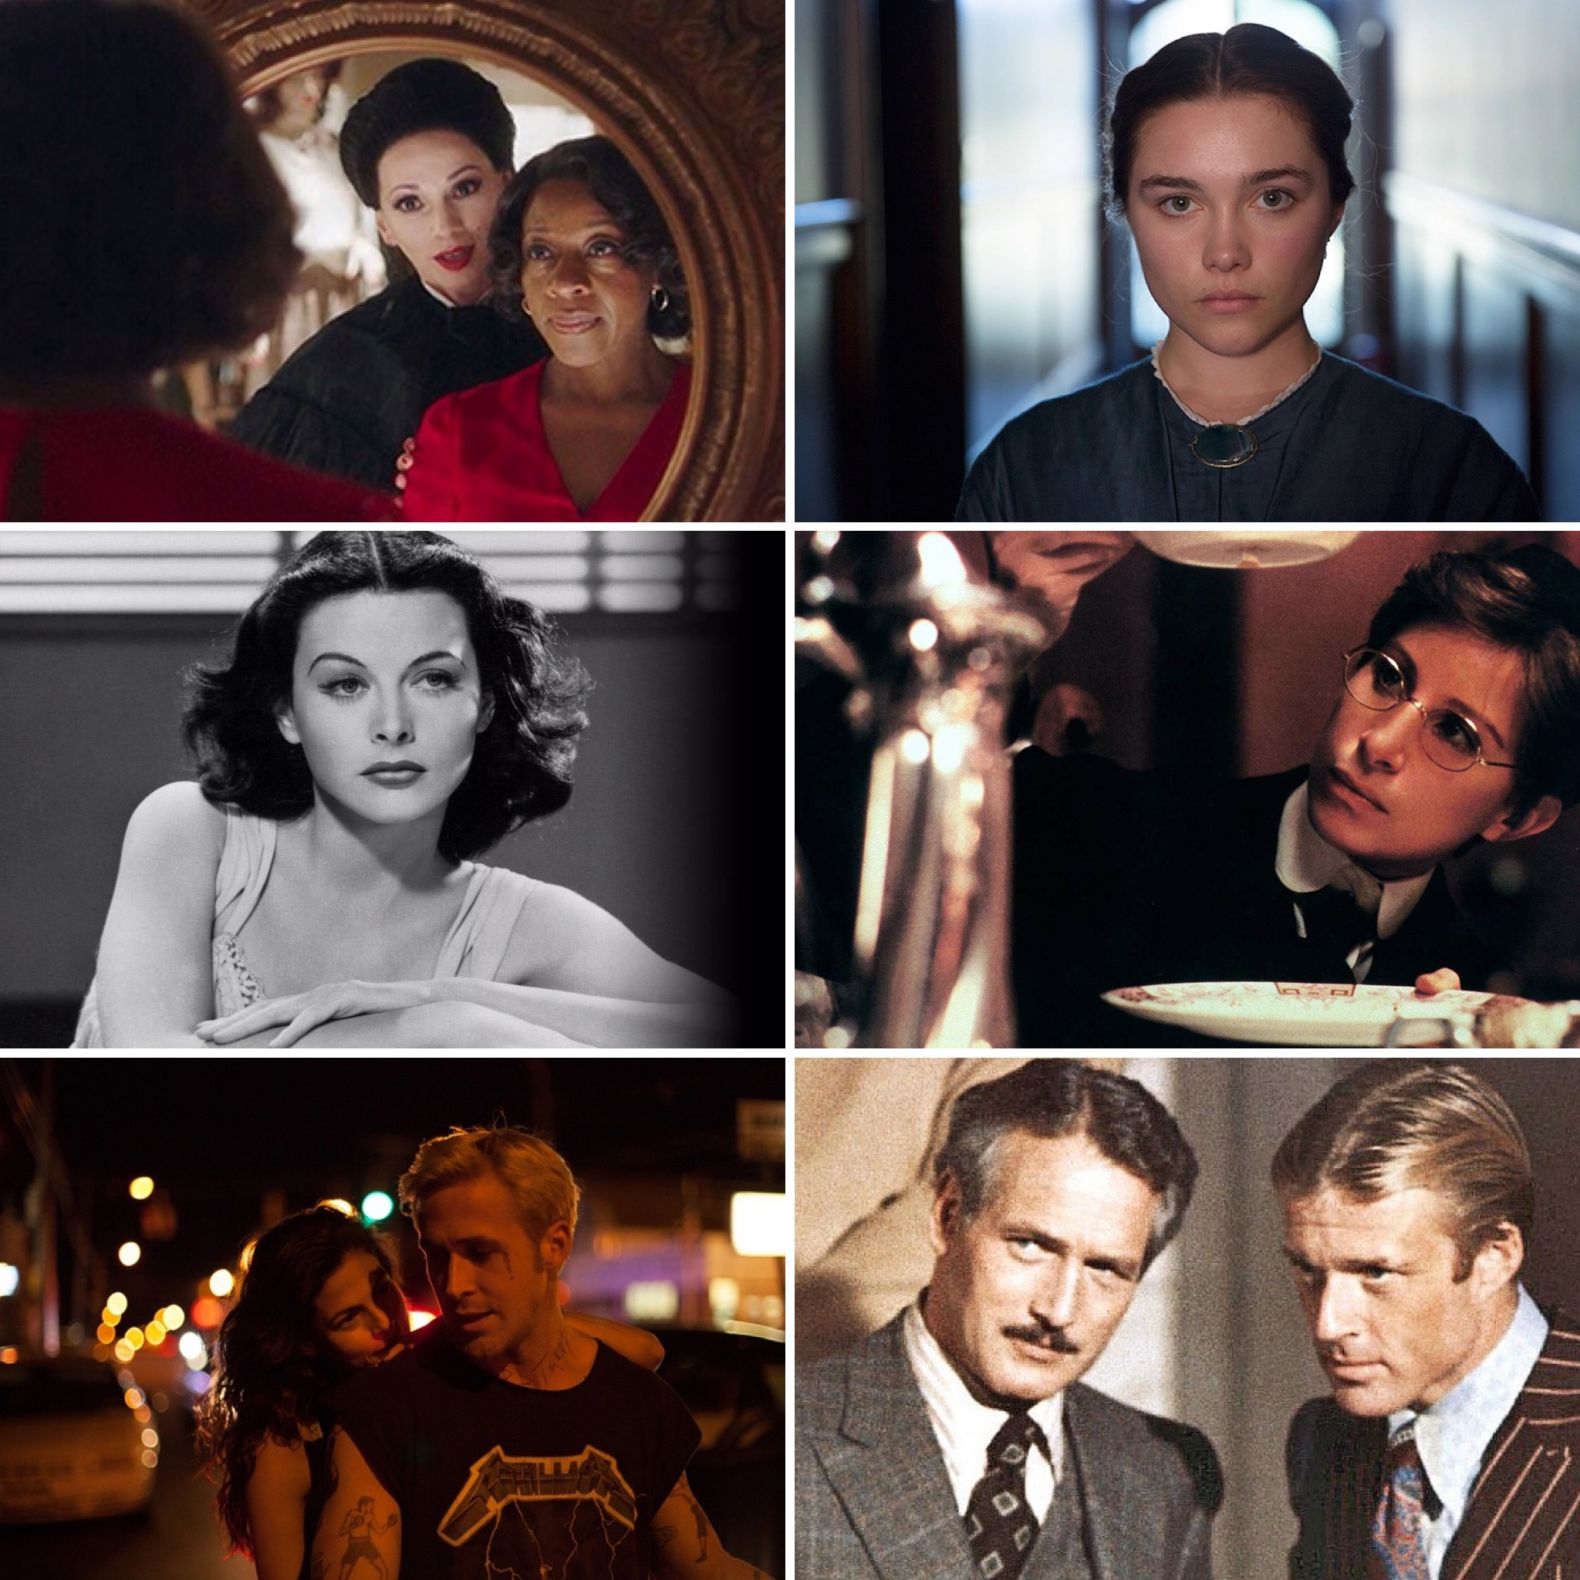 Duke Box #47: Our Guide to the Best Films on TV